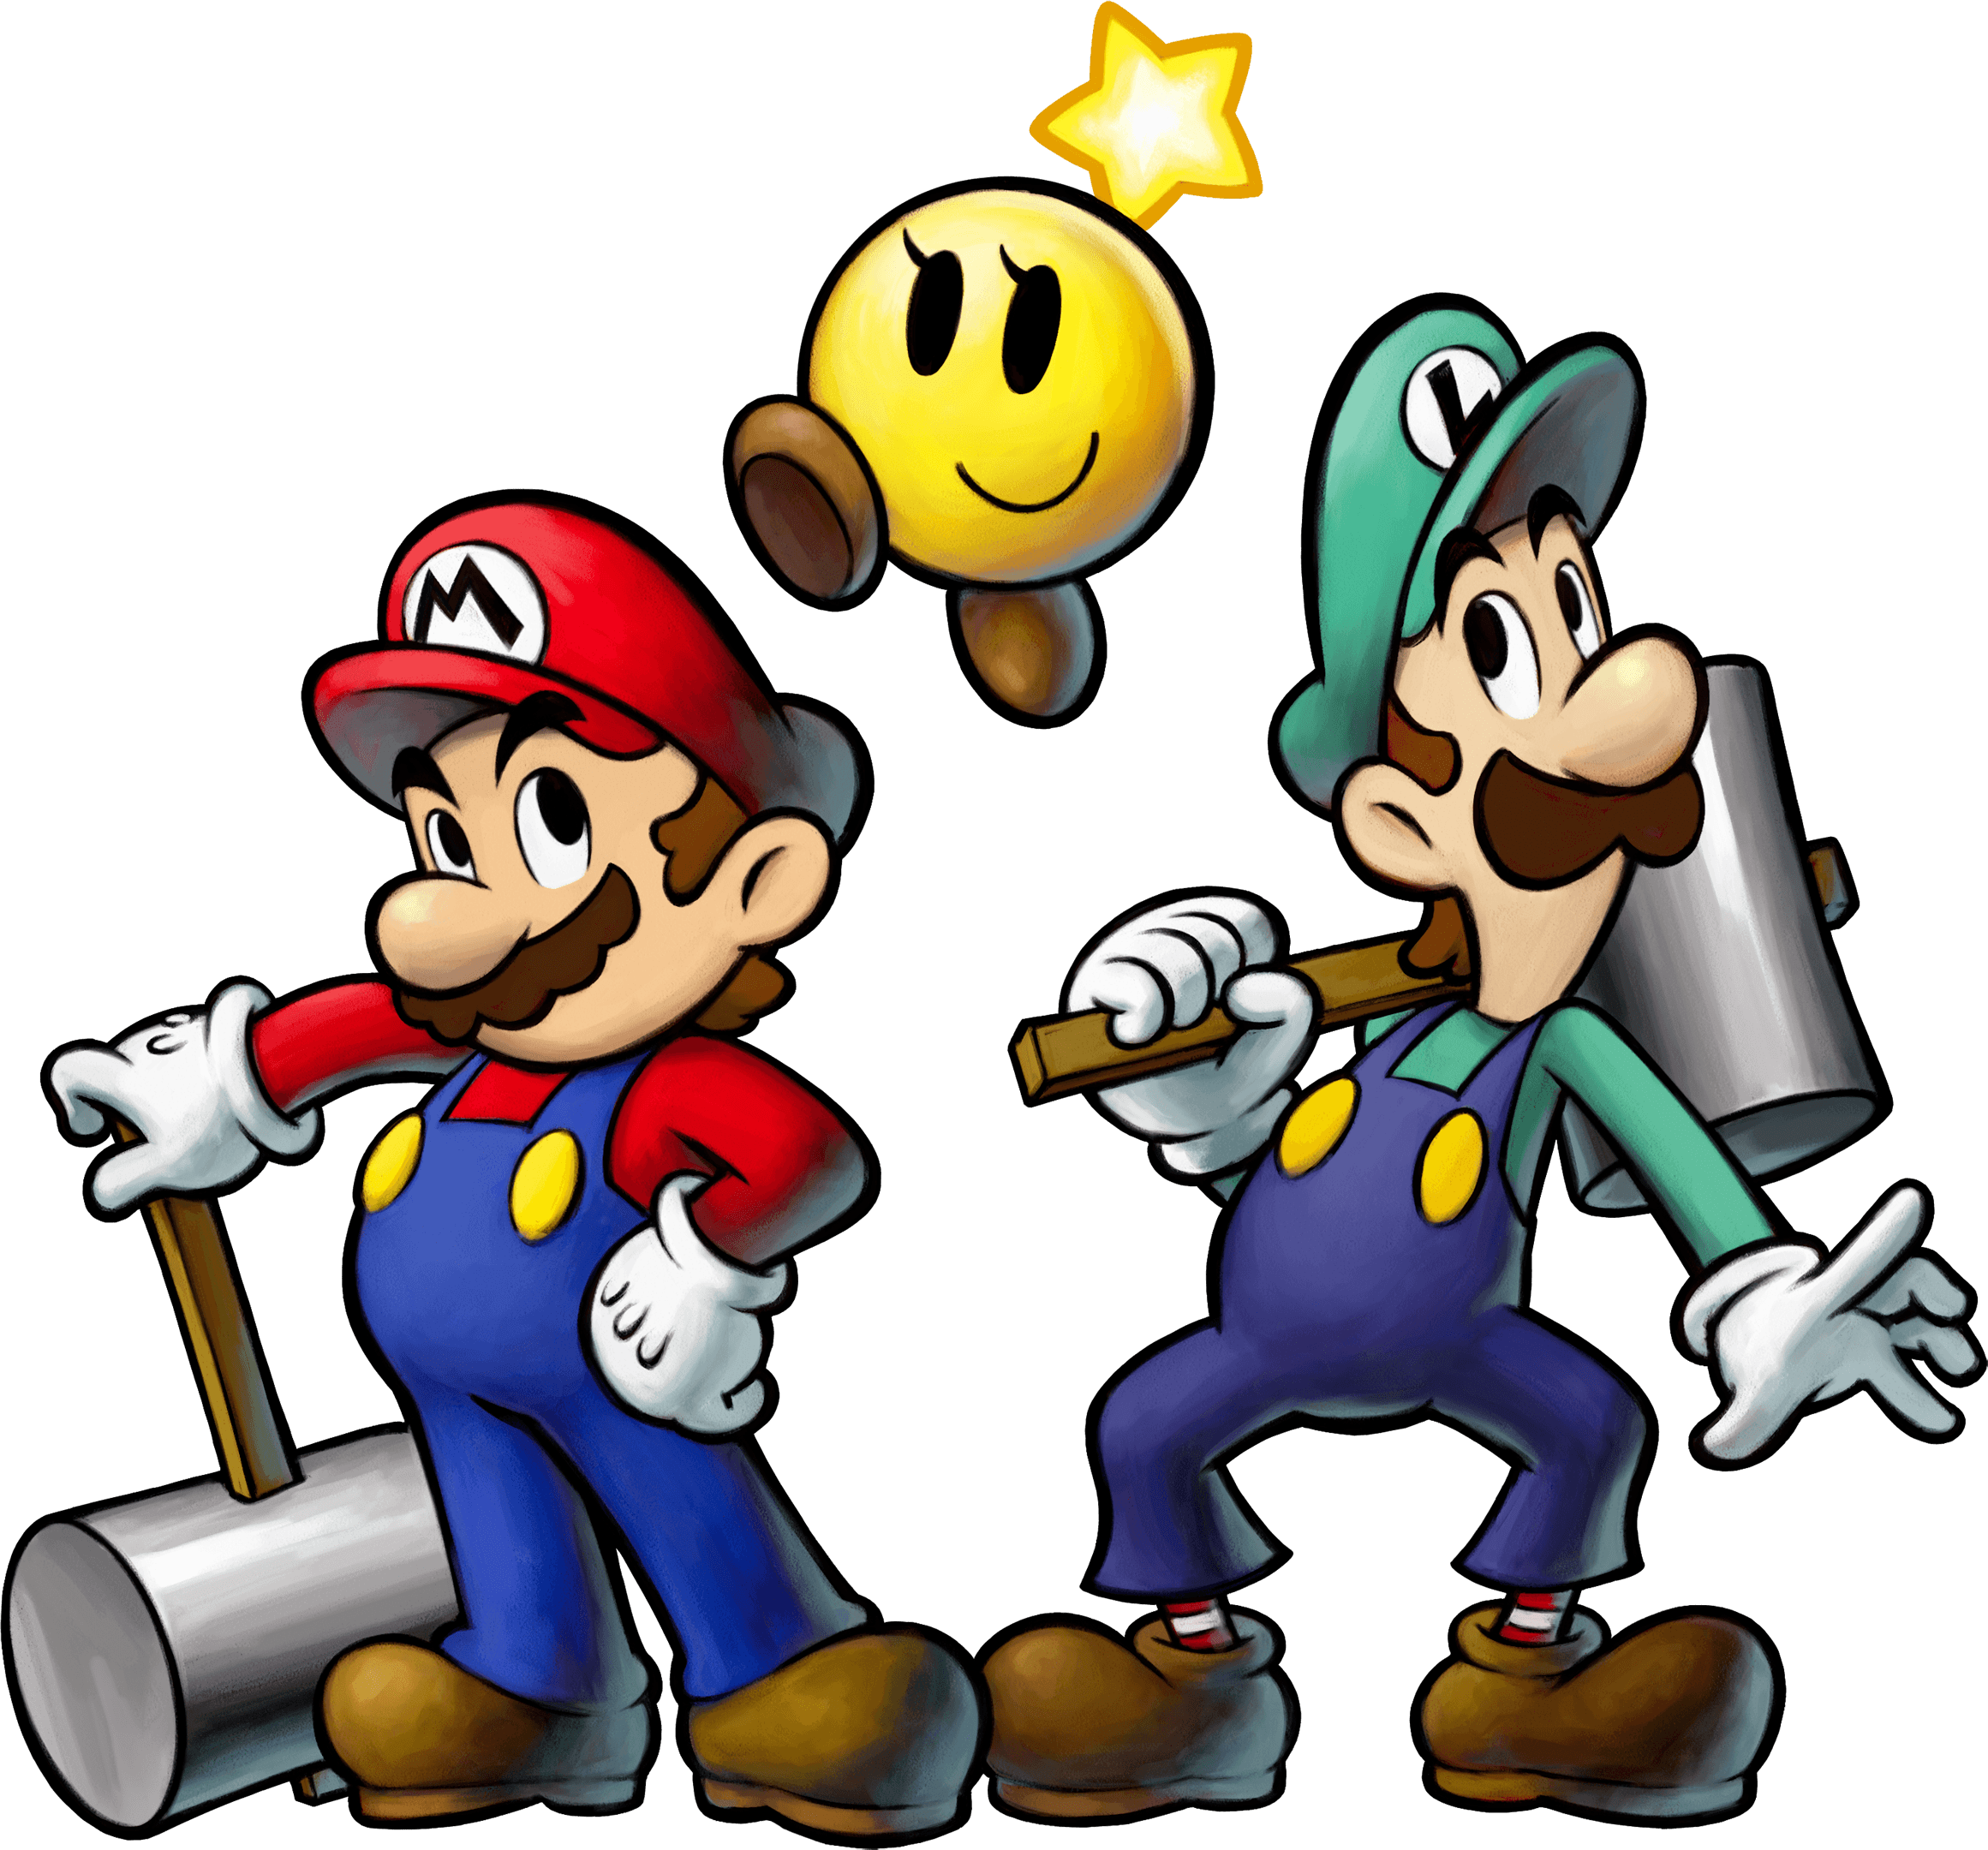 Mario & Luigi Bowser Inside Story : It works on R4 BUT